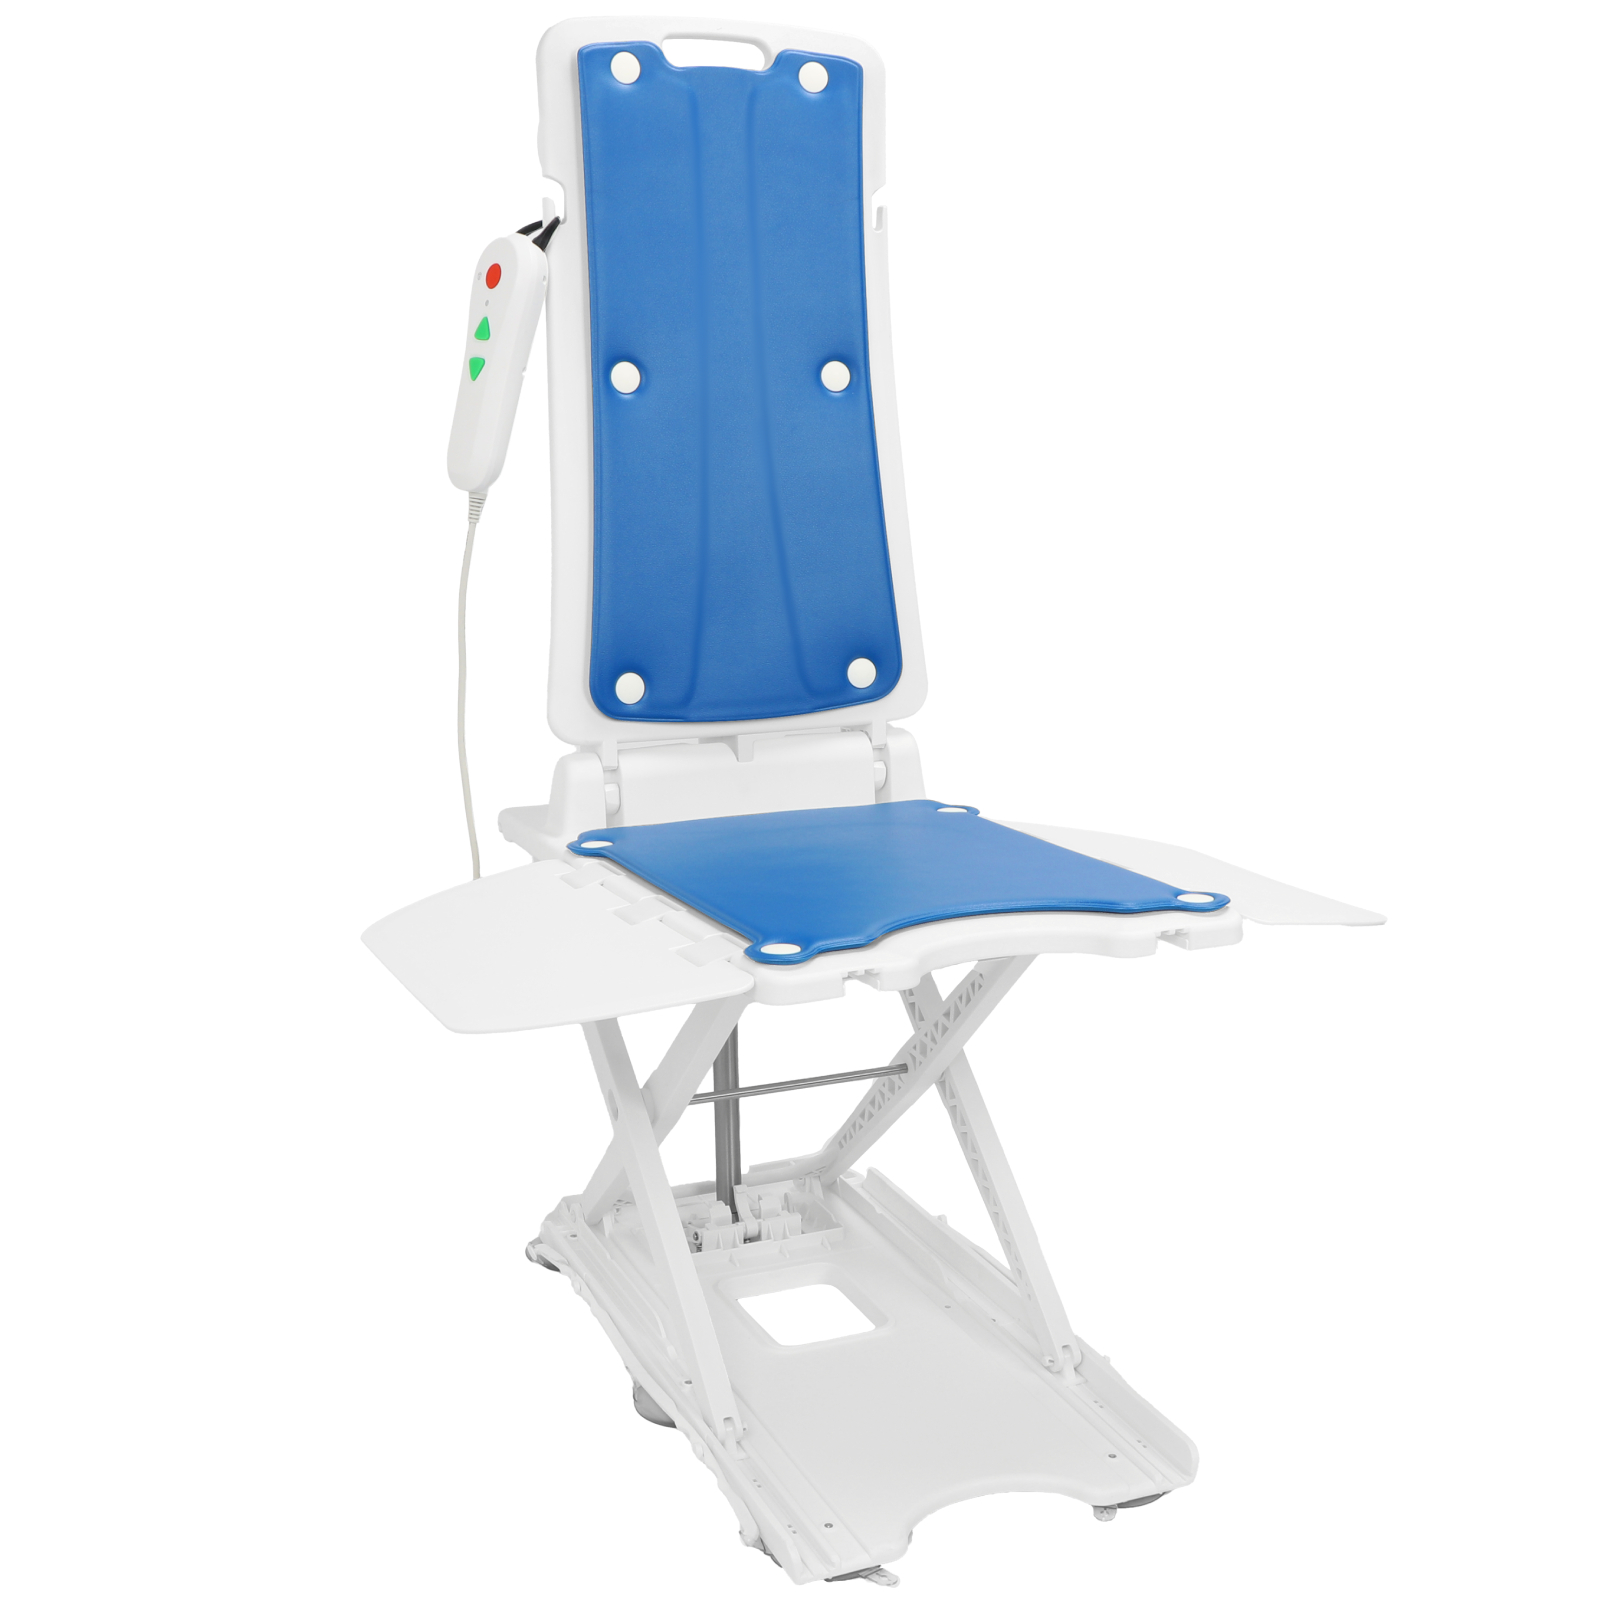 ELPH GUARD Electric Floor Lift for Elderly Falls, Bathtub Lift Chair with Padding for Senior